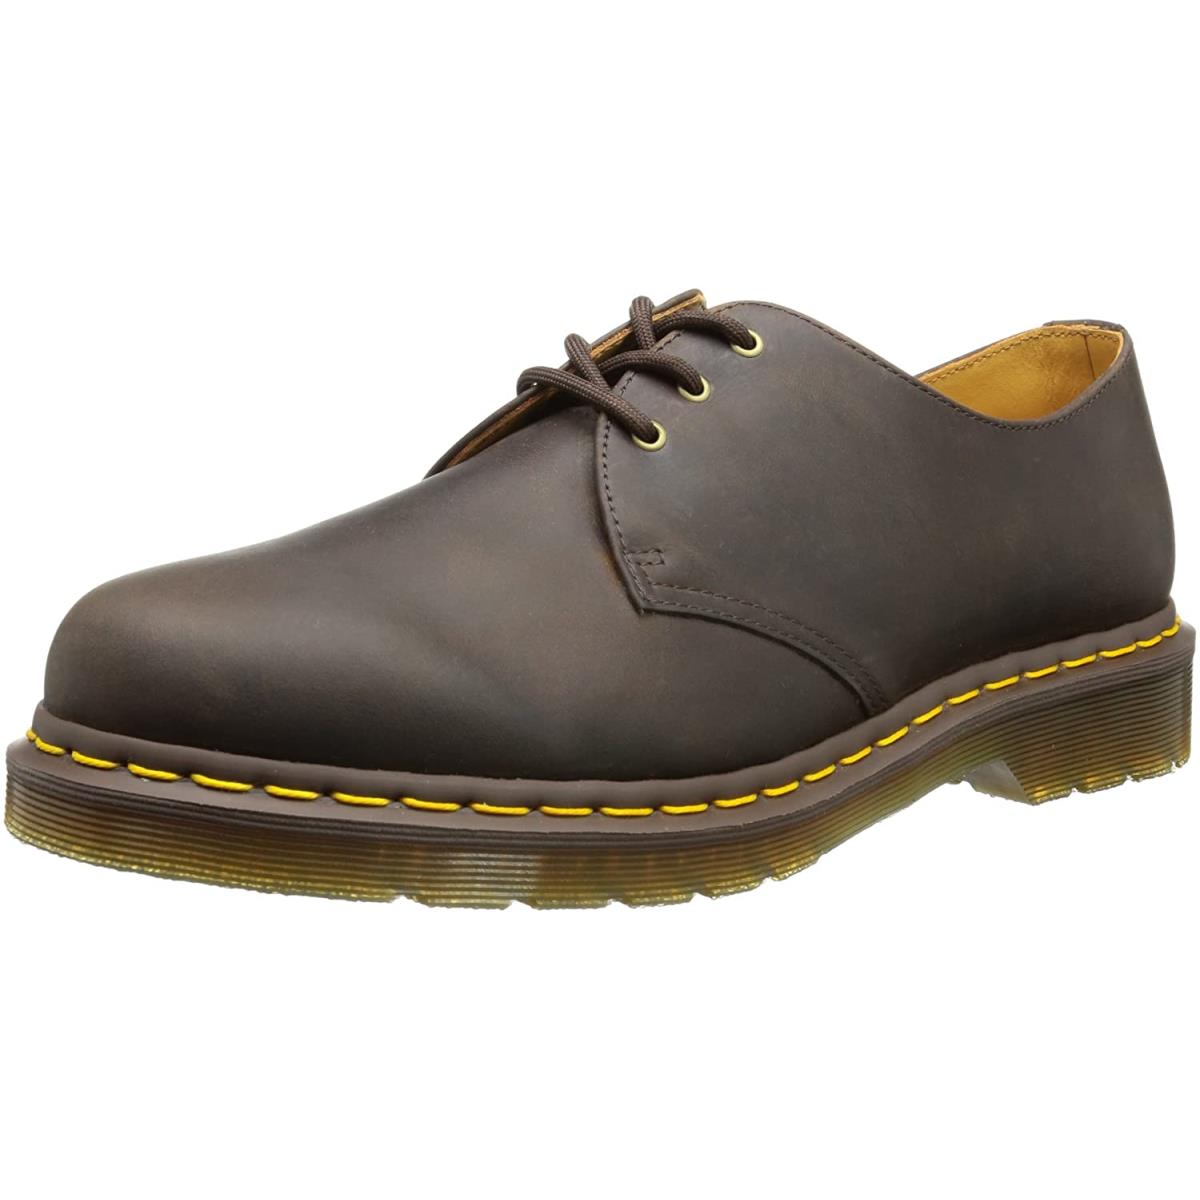 Dr. Martens 1461 3-Eye Leather Oxford Shoe For Men and Women Gaucho